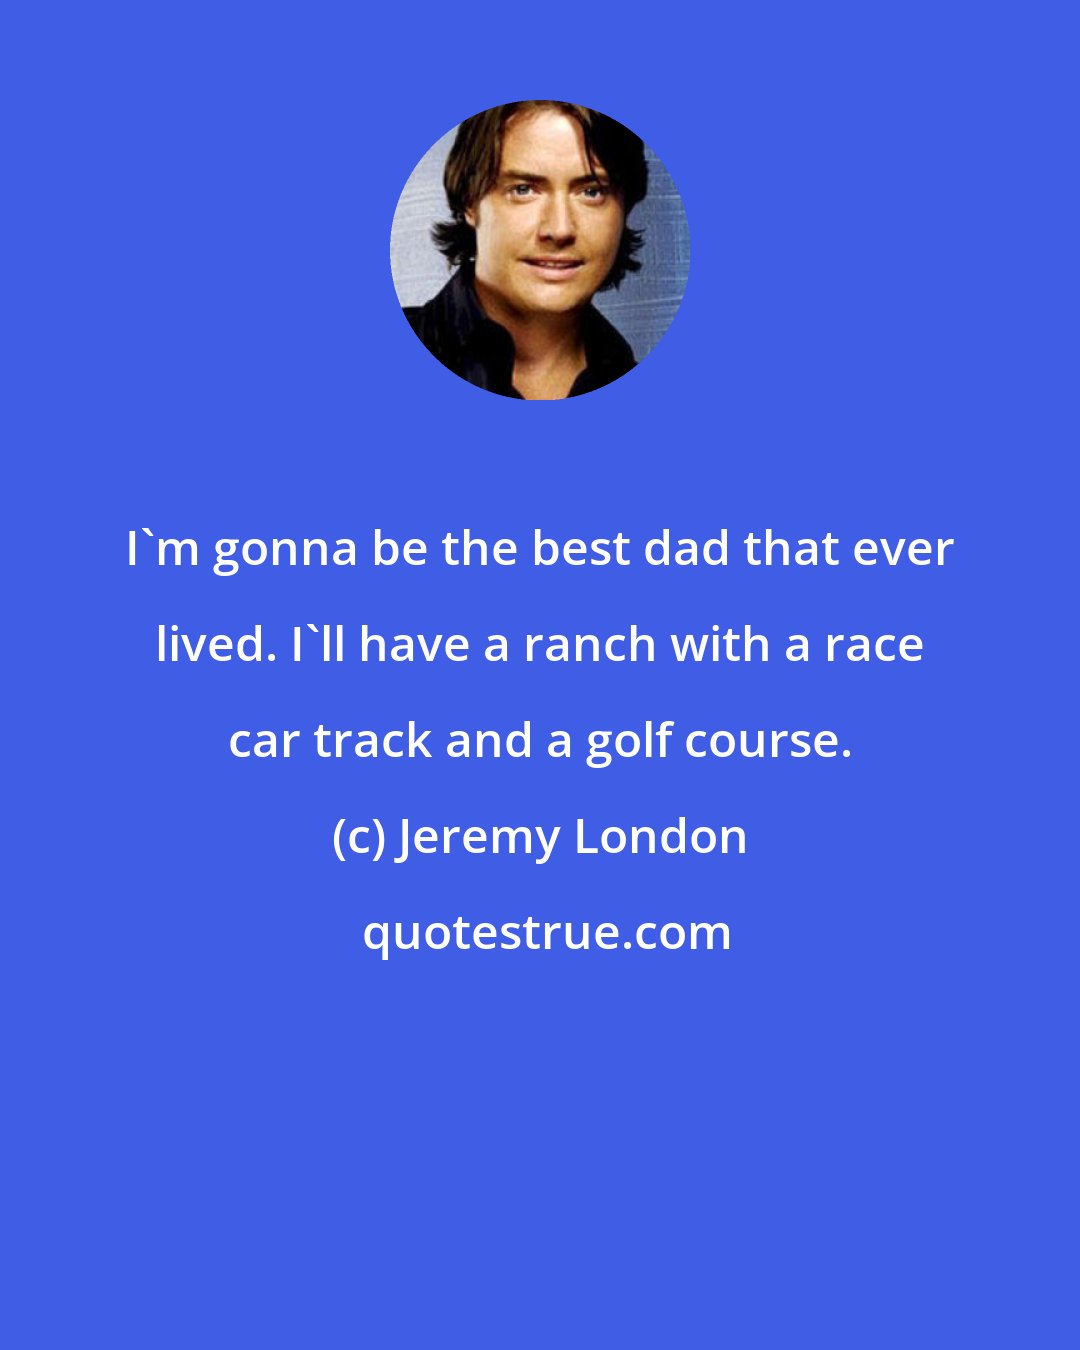 Jeremy London: I'm gonna be the best dad that ever lived. I'll have a ranch with a race car track and a golf course.